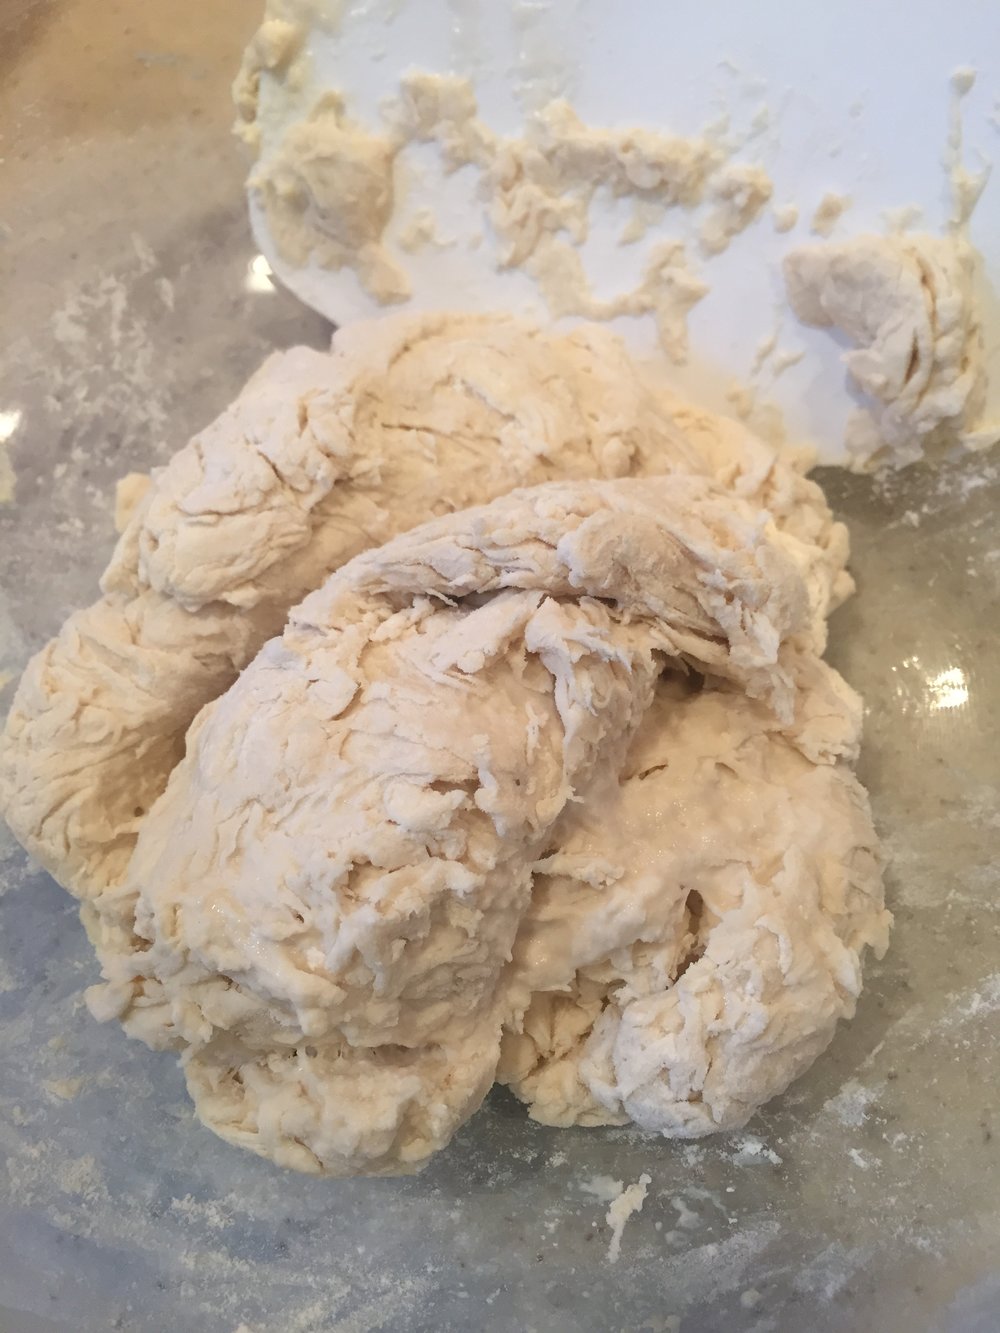 Yeasted Dough (detrempe)